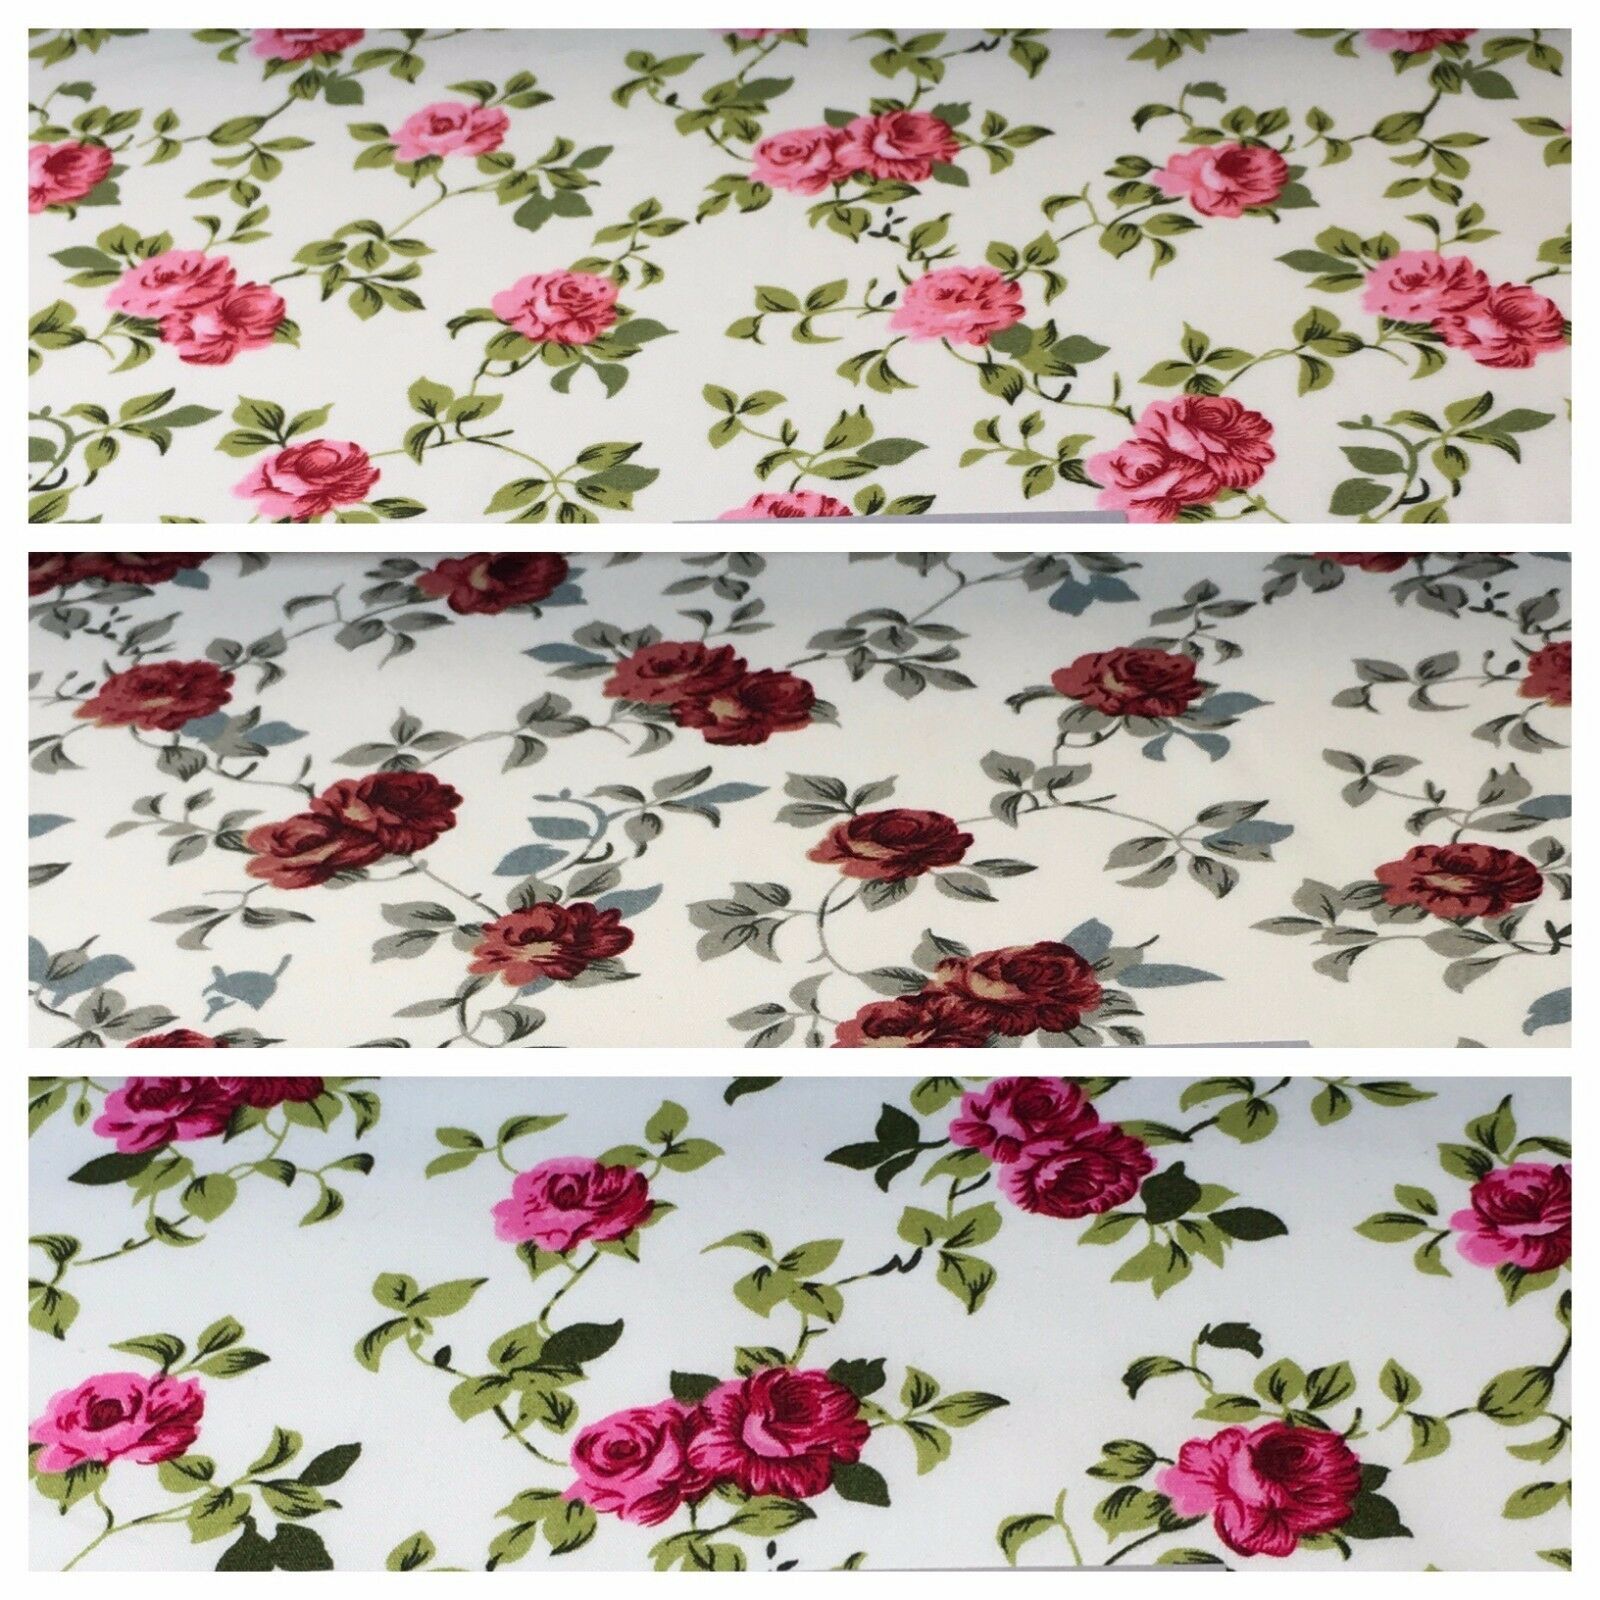 Floral Vintage Shabby Chic 100% Cotton printed fabric 44" M743 Mtex